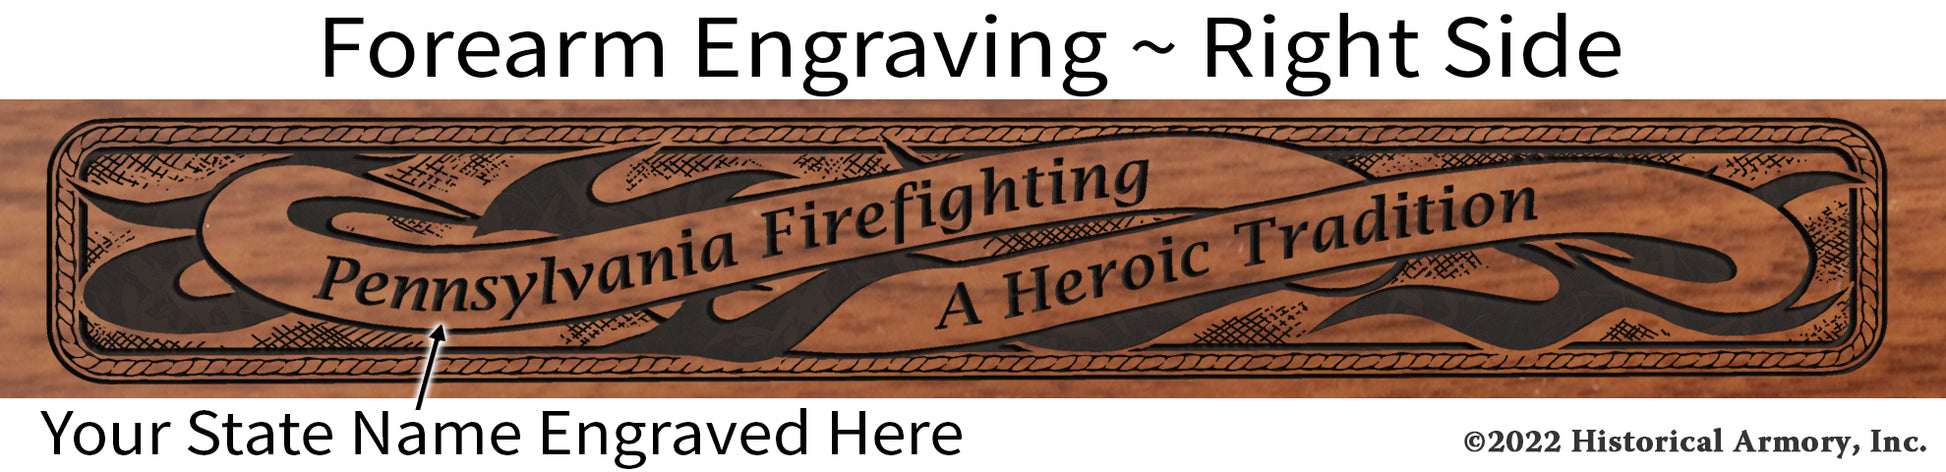 Firefighter Heroic Tradition Engraved Rifle Limited Edition